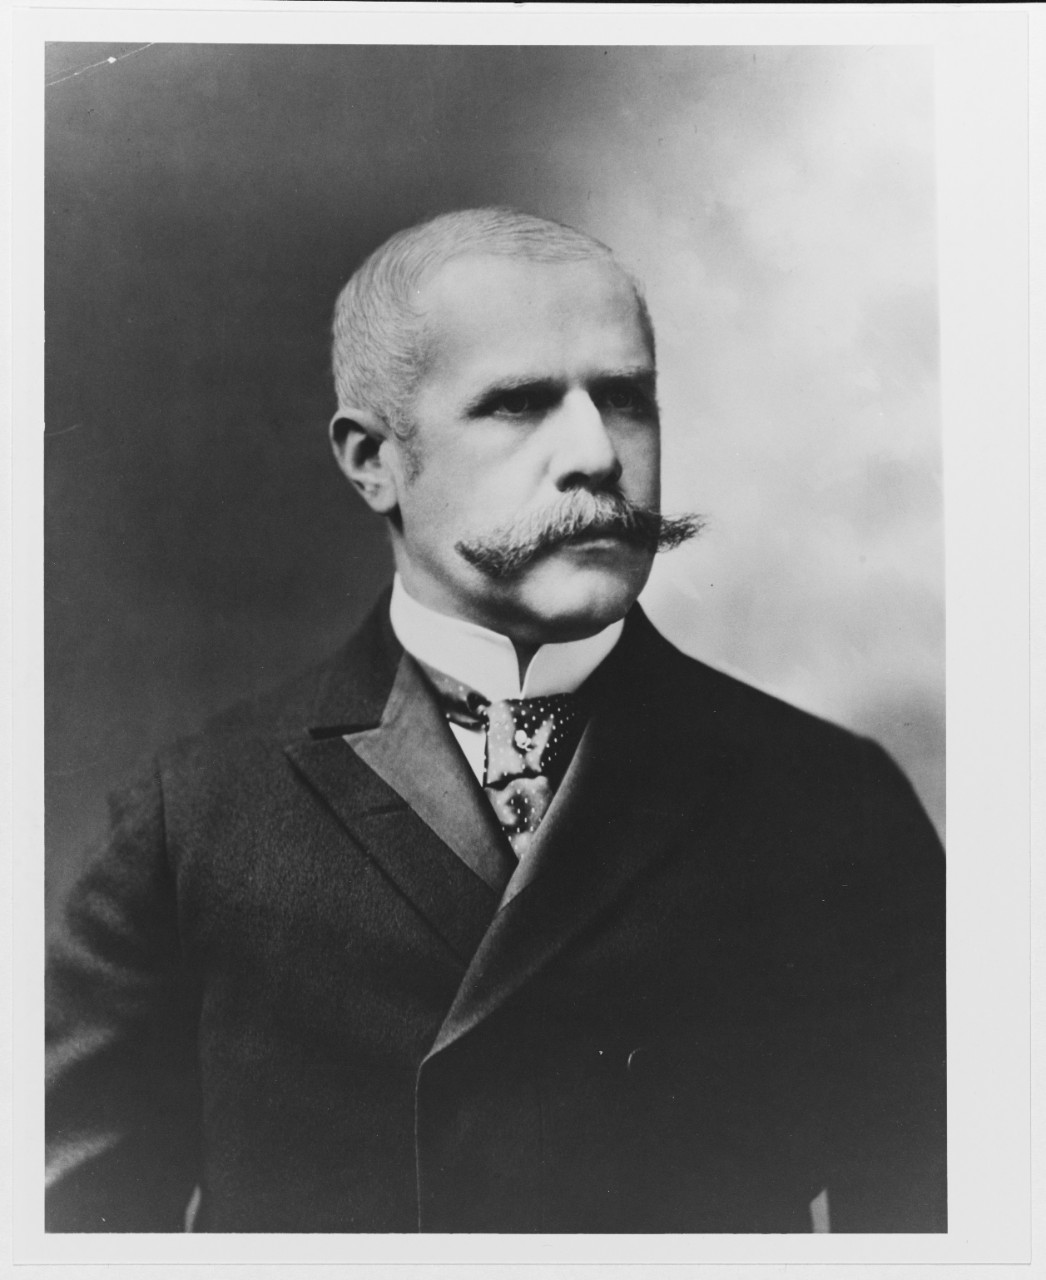 Photo #: NH 82502  Assistant Secretary of the Navy James R. Soley